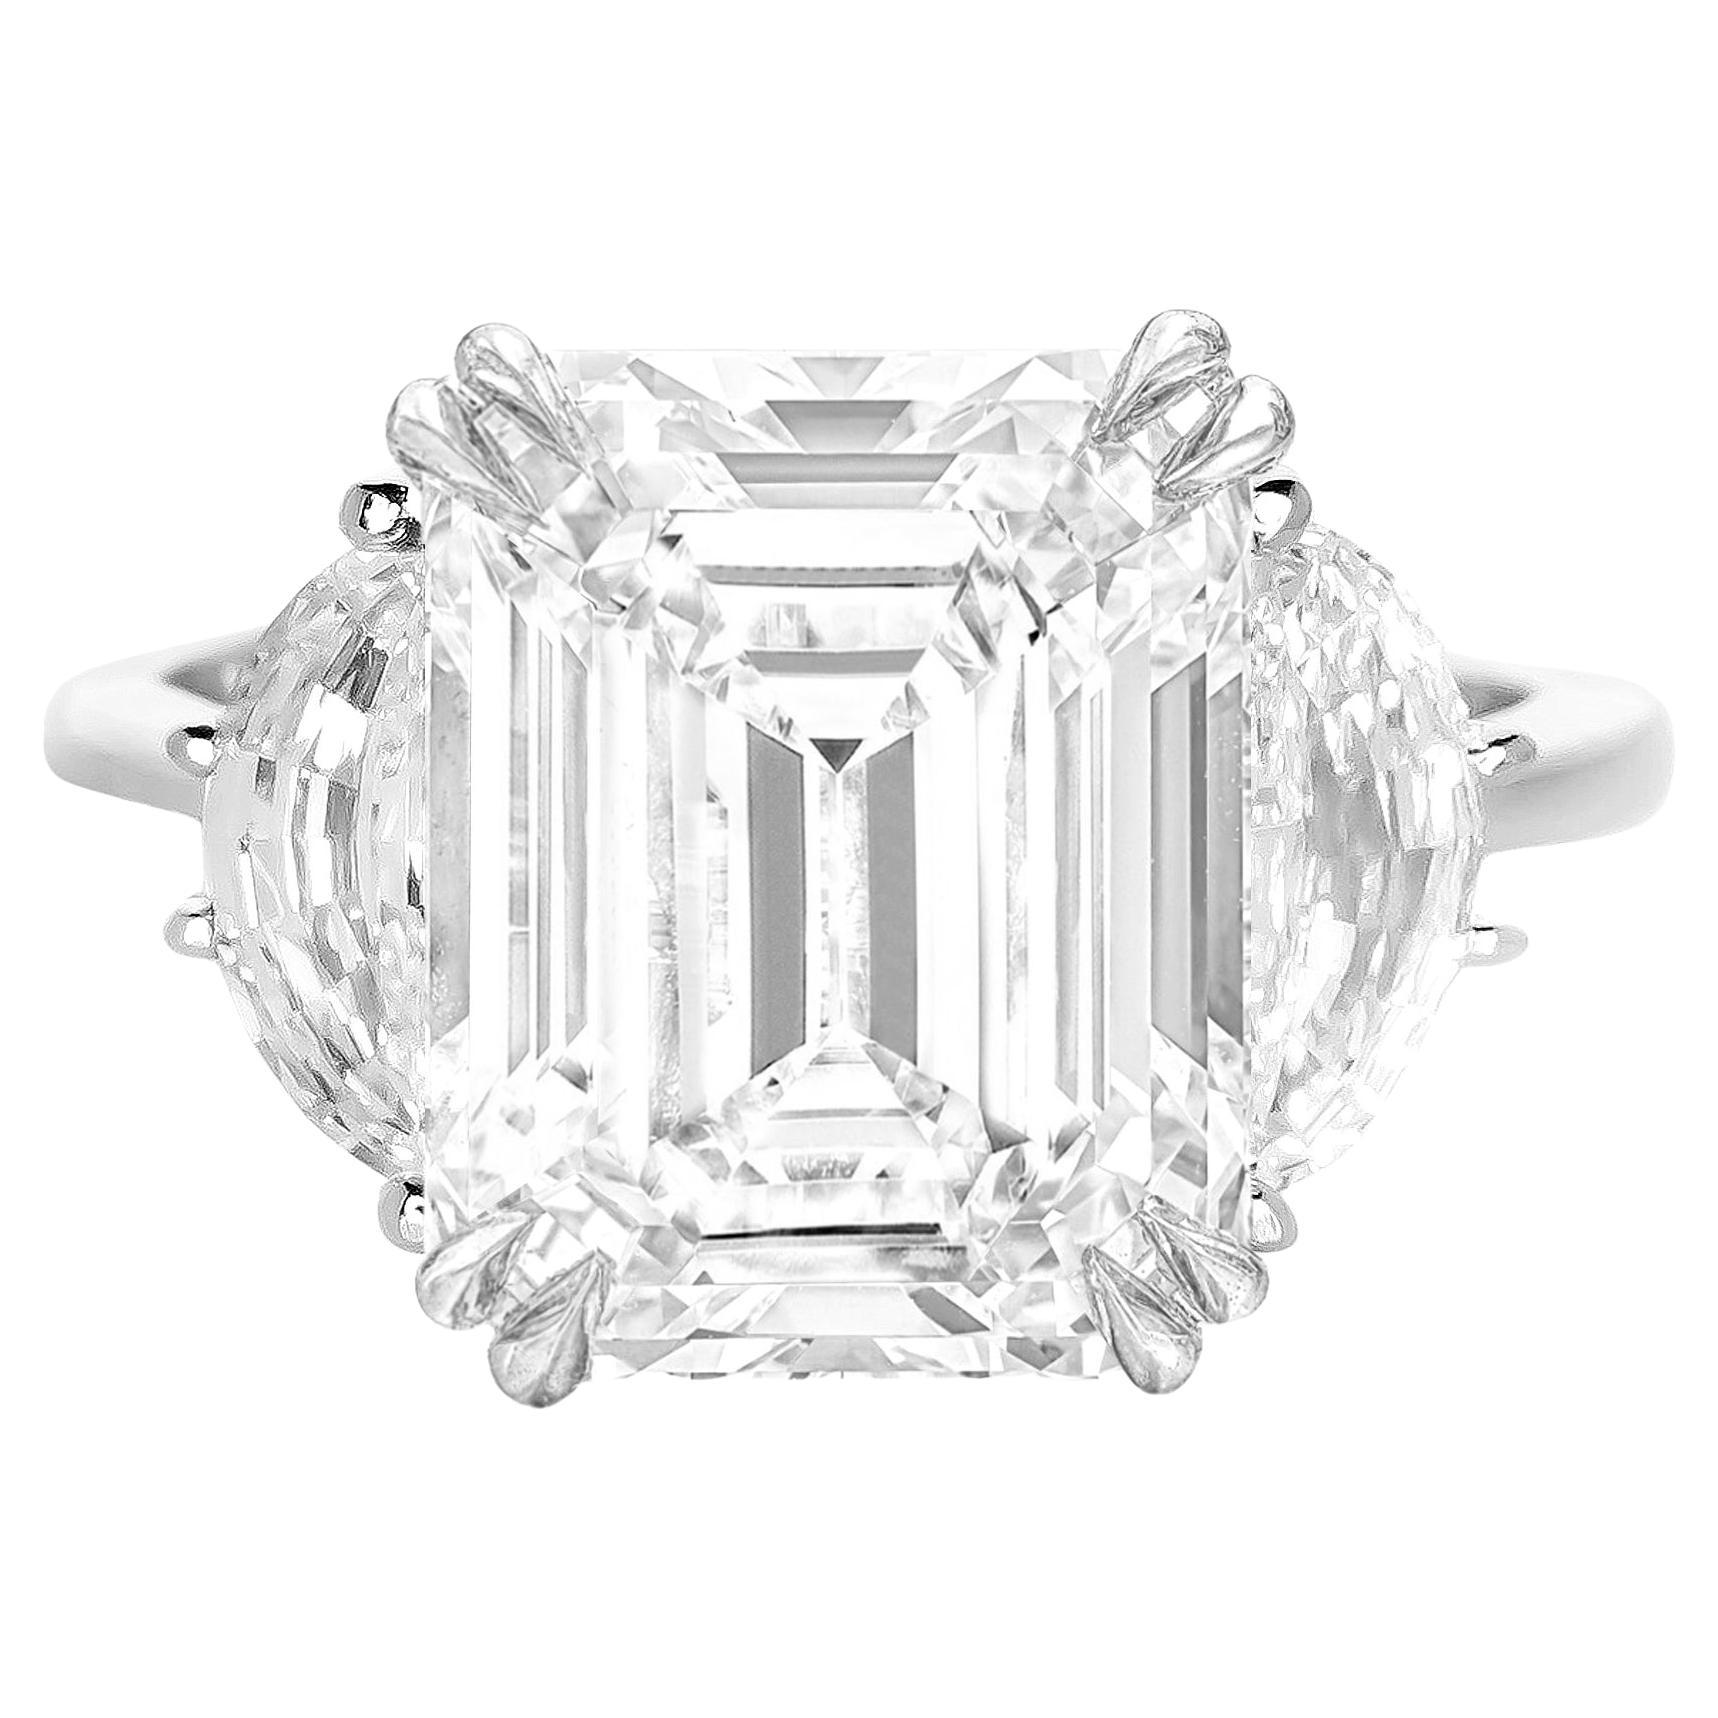 GIA Certified 10 Carat G Color VVS Clarity Emerald Cut Diamond 18k White Gold For Sale